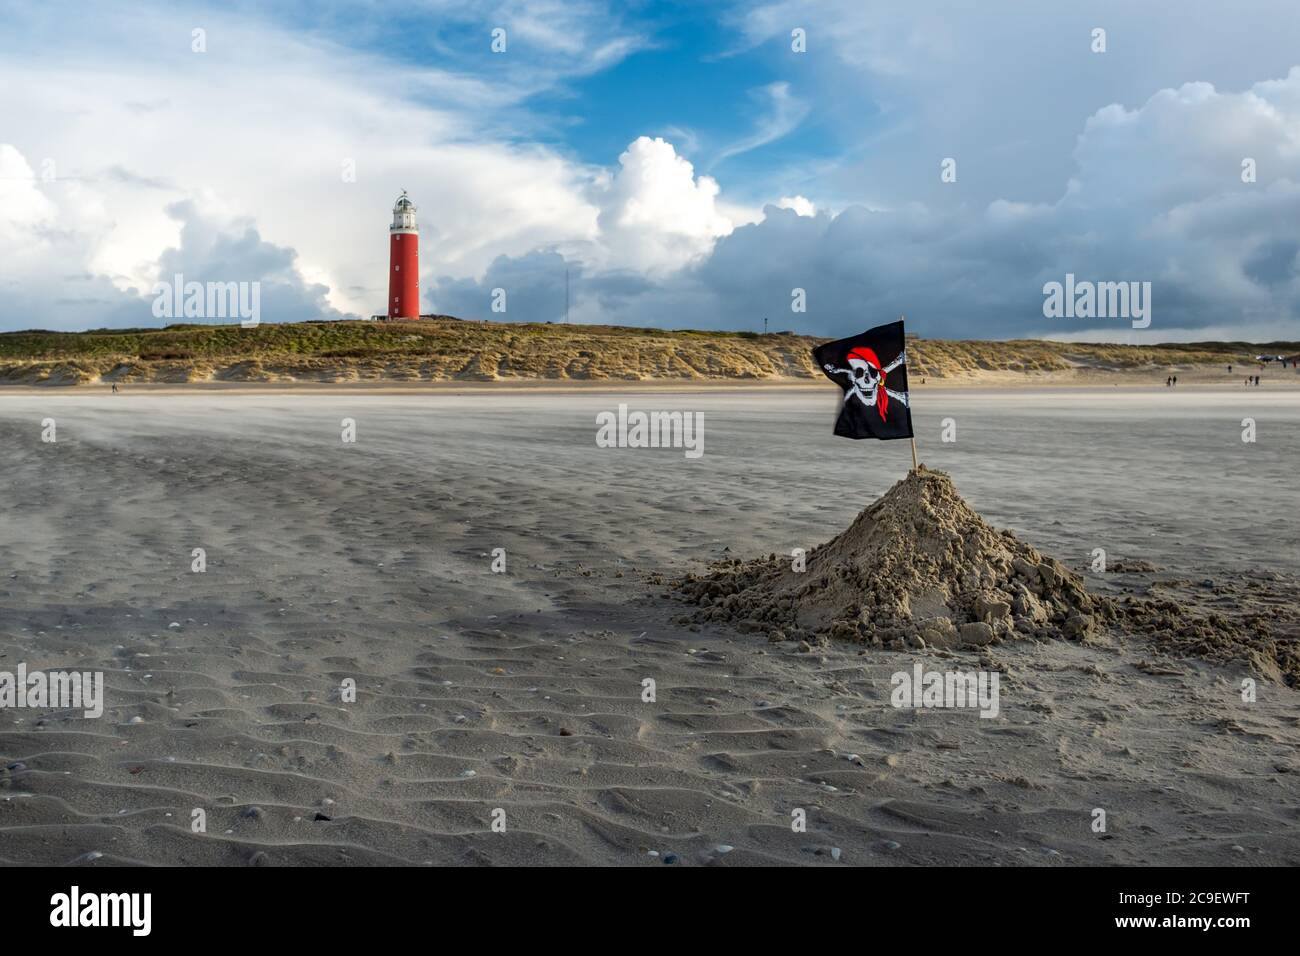 Pirate flag and lighthouse on the windswept beaches of Texel Stock Photo